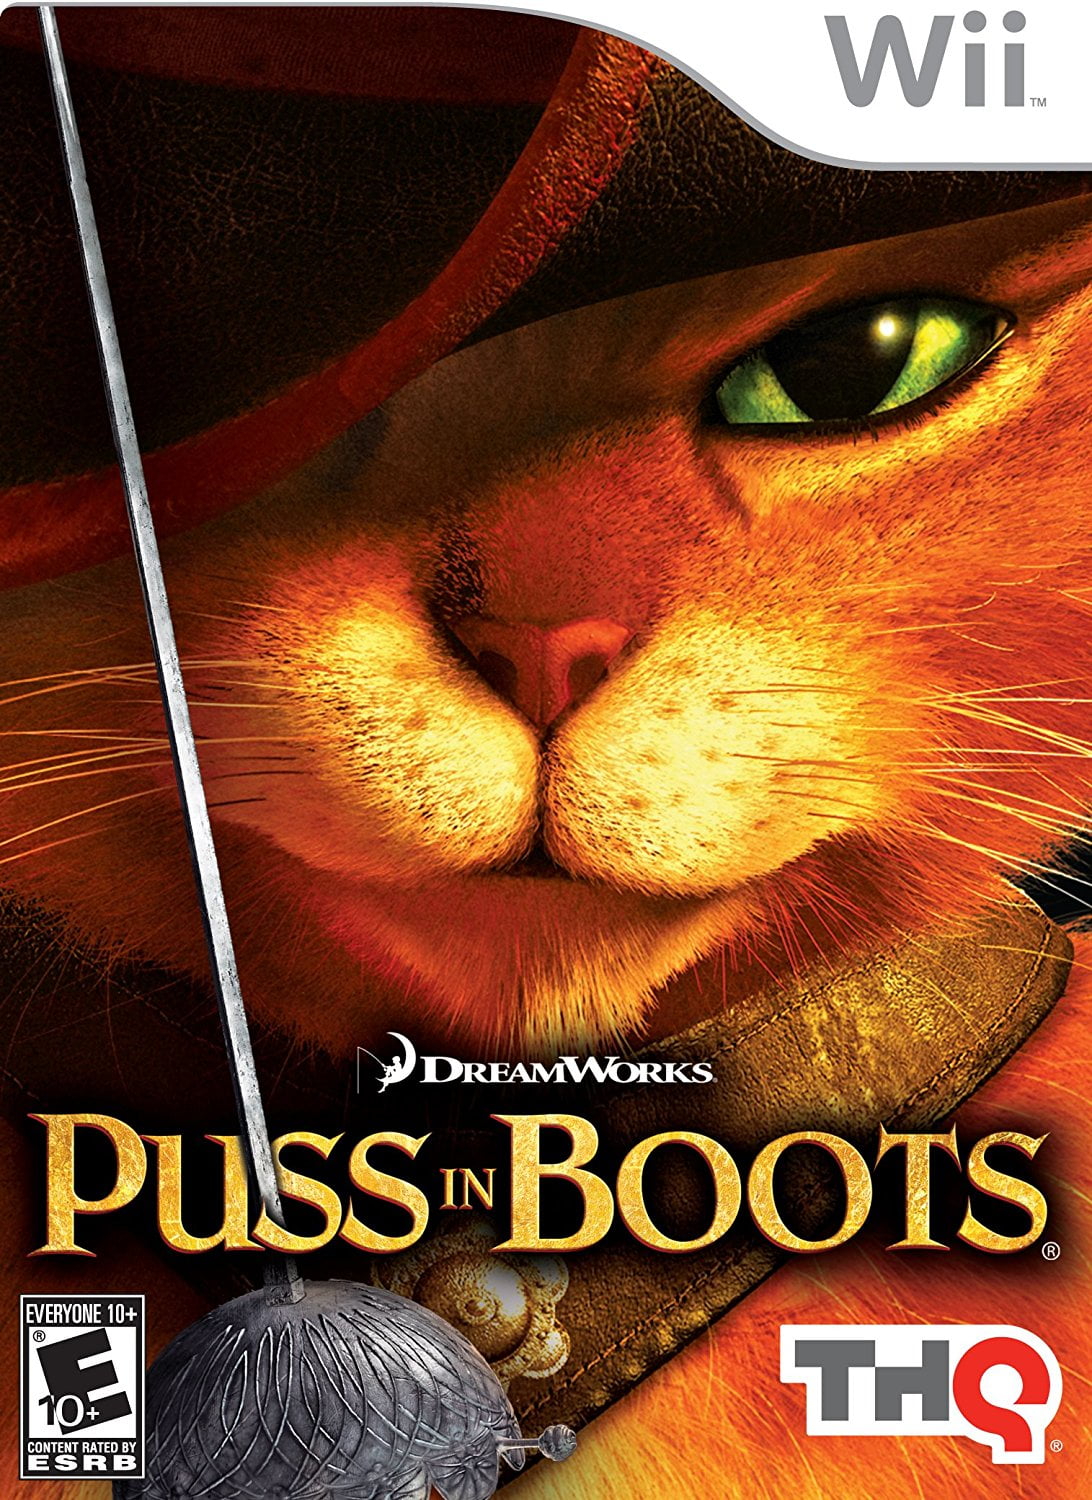 Puss in Boots: Interactive Book para Nintendo Switch - Site